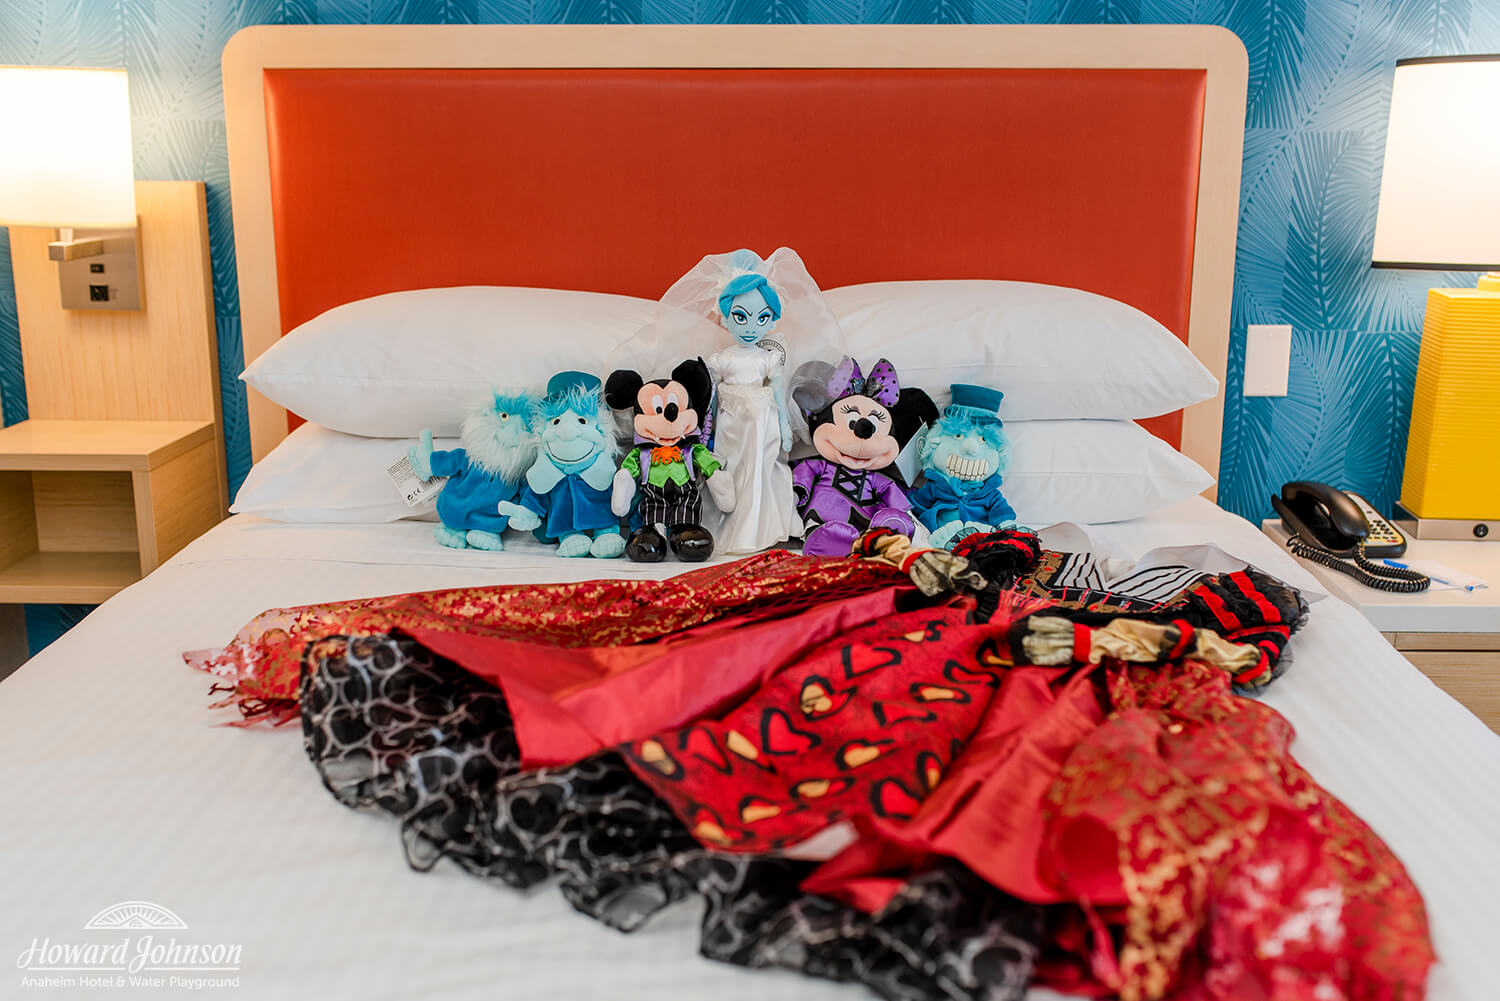 Stuffed Disney characters and a dress costume lay on a hotel room bed